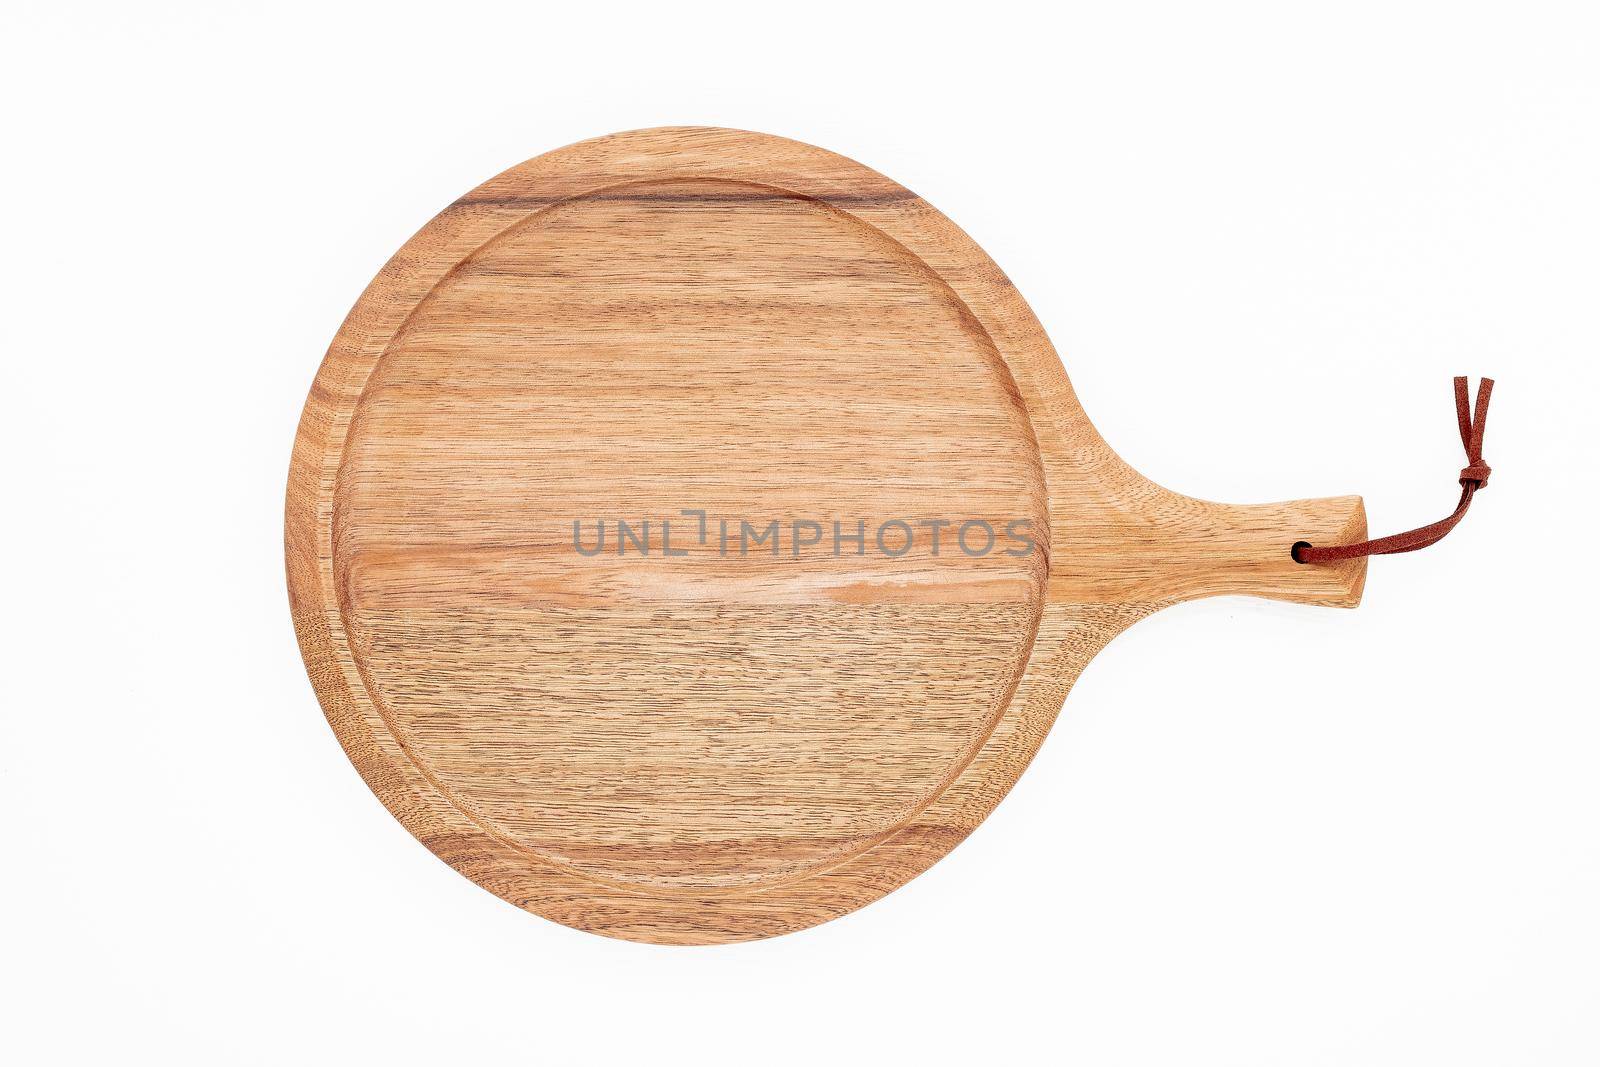 Empty wooden pizza platter set up on white background. Pizza board on white wooden background flat lay and copy space.